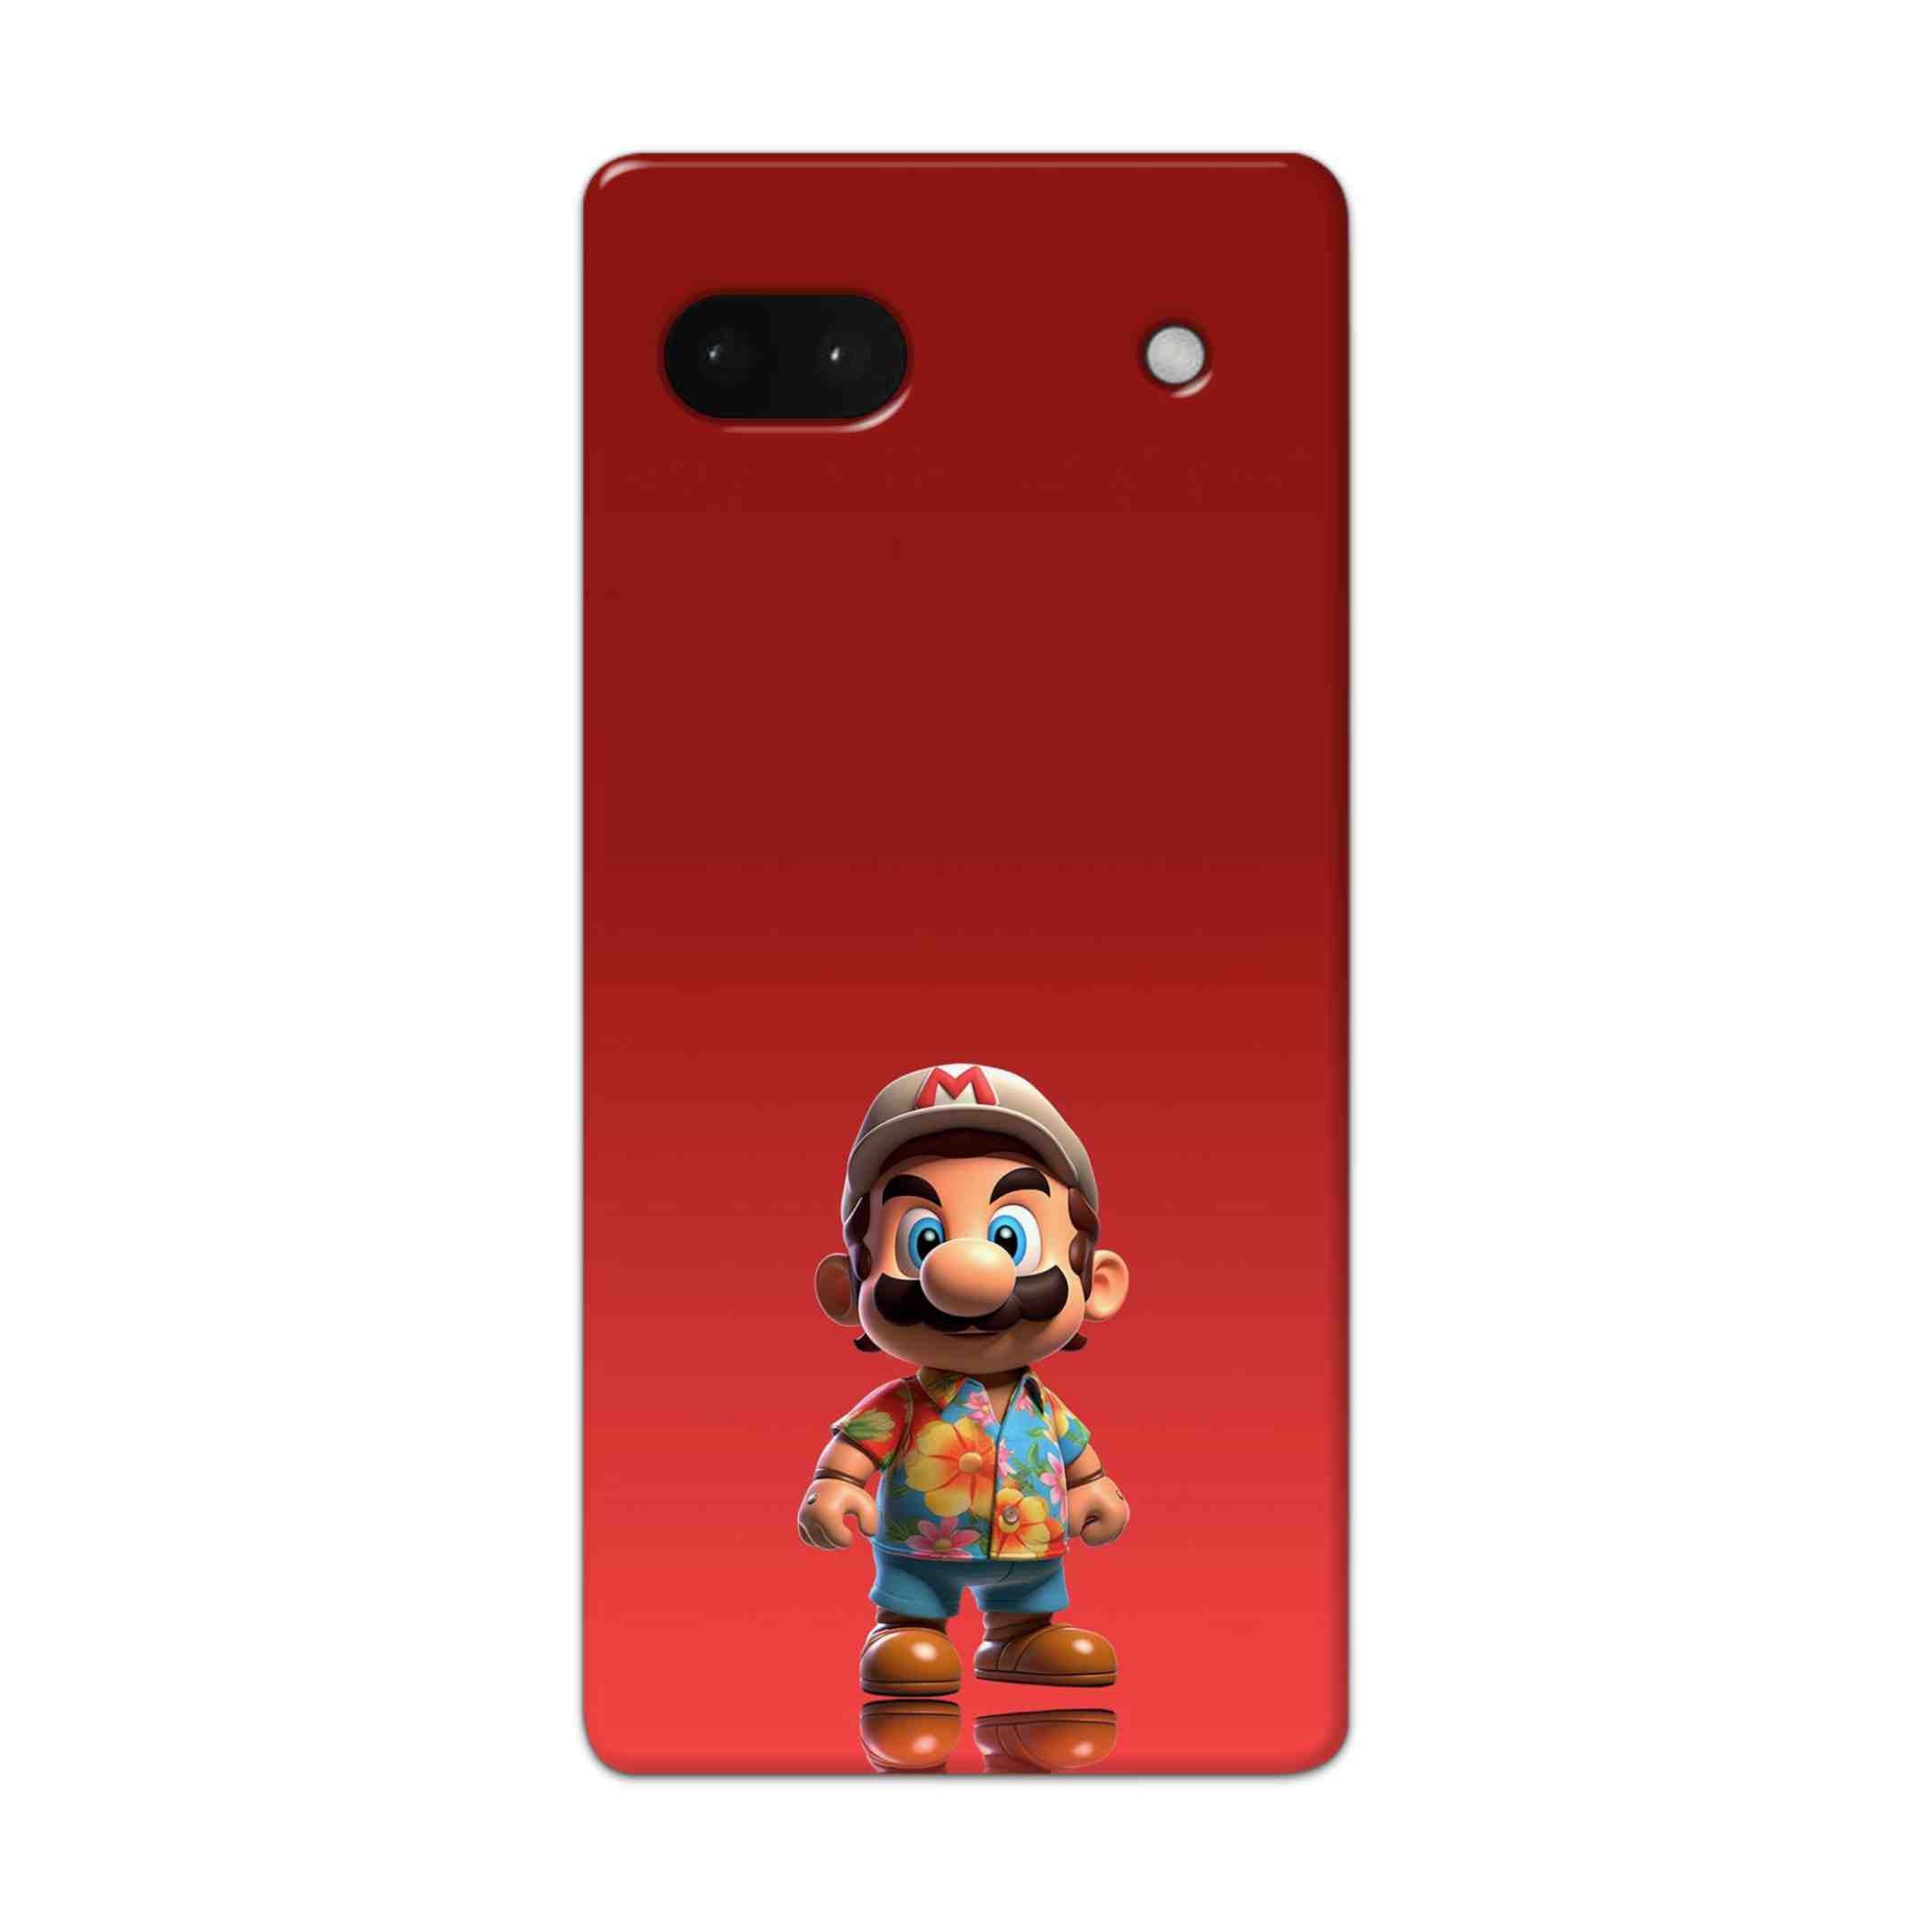 Buy Mario Hard Back Mobile Phone Case Cover For Google Pixel 6a Online